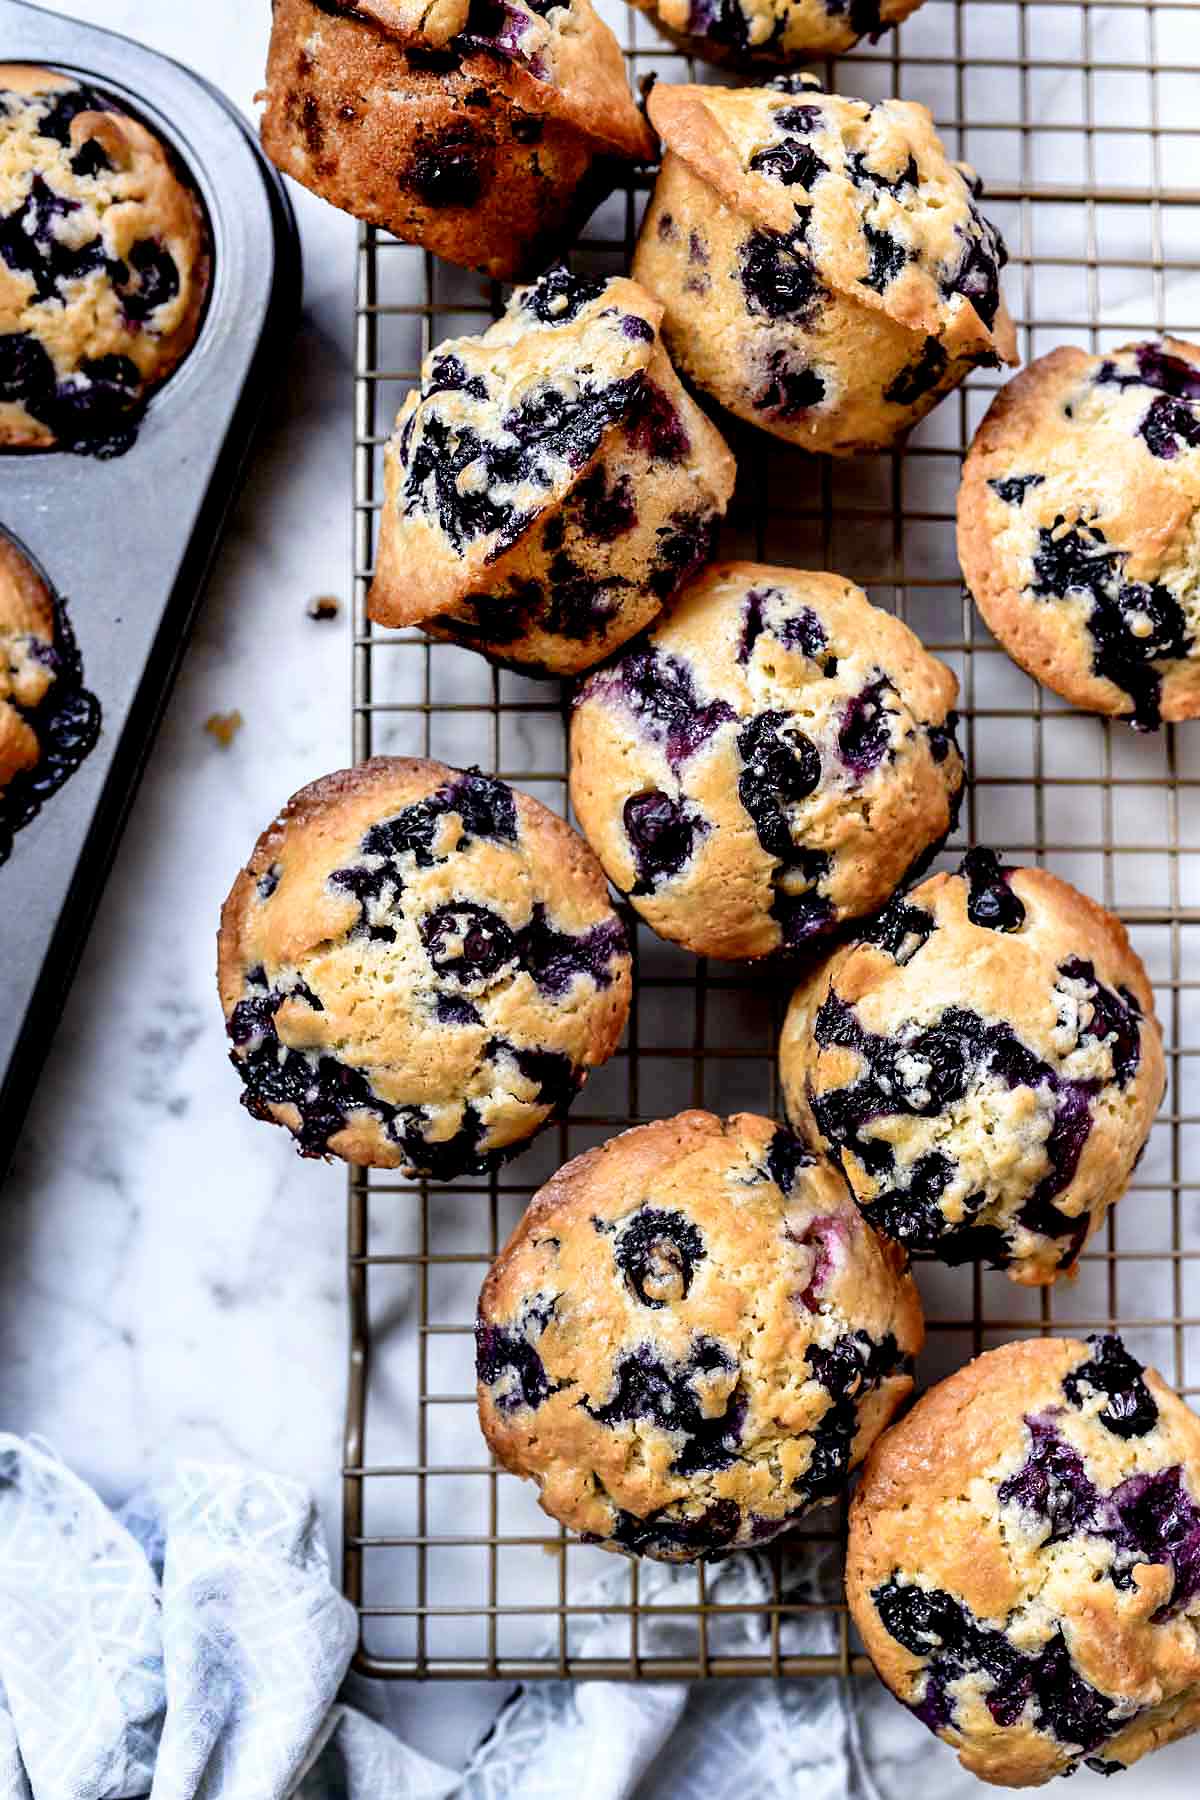 Our blueberry, chocolate chip, and lemon poppy seed muffin tops